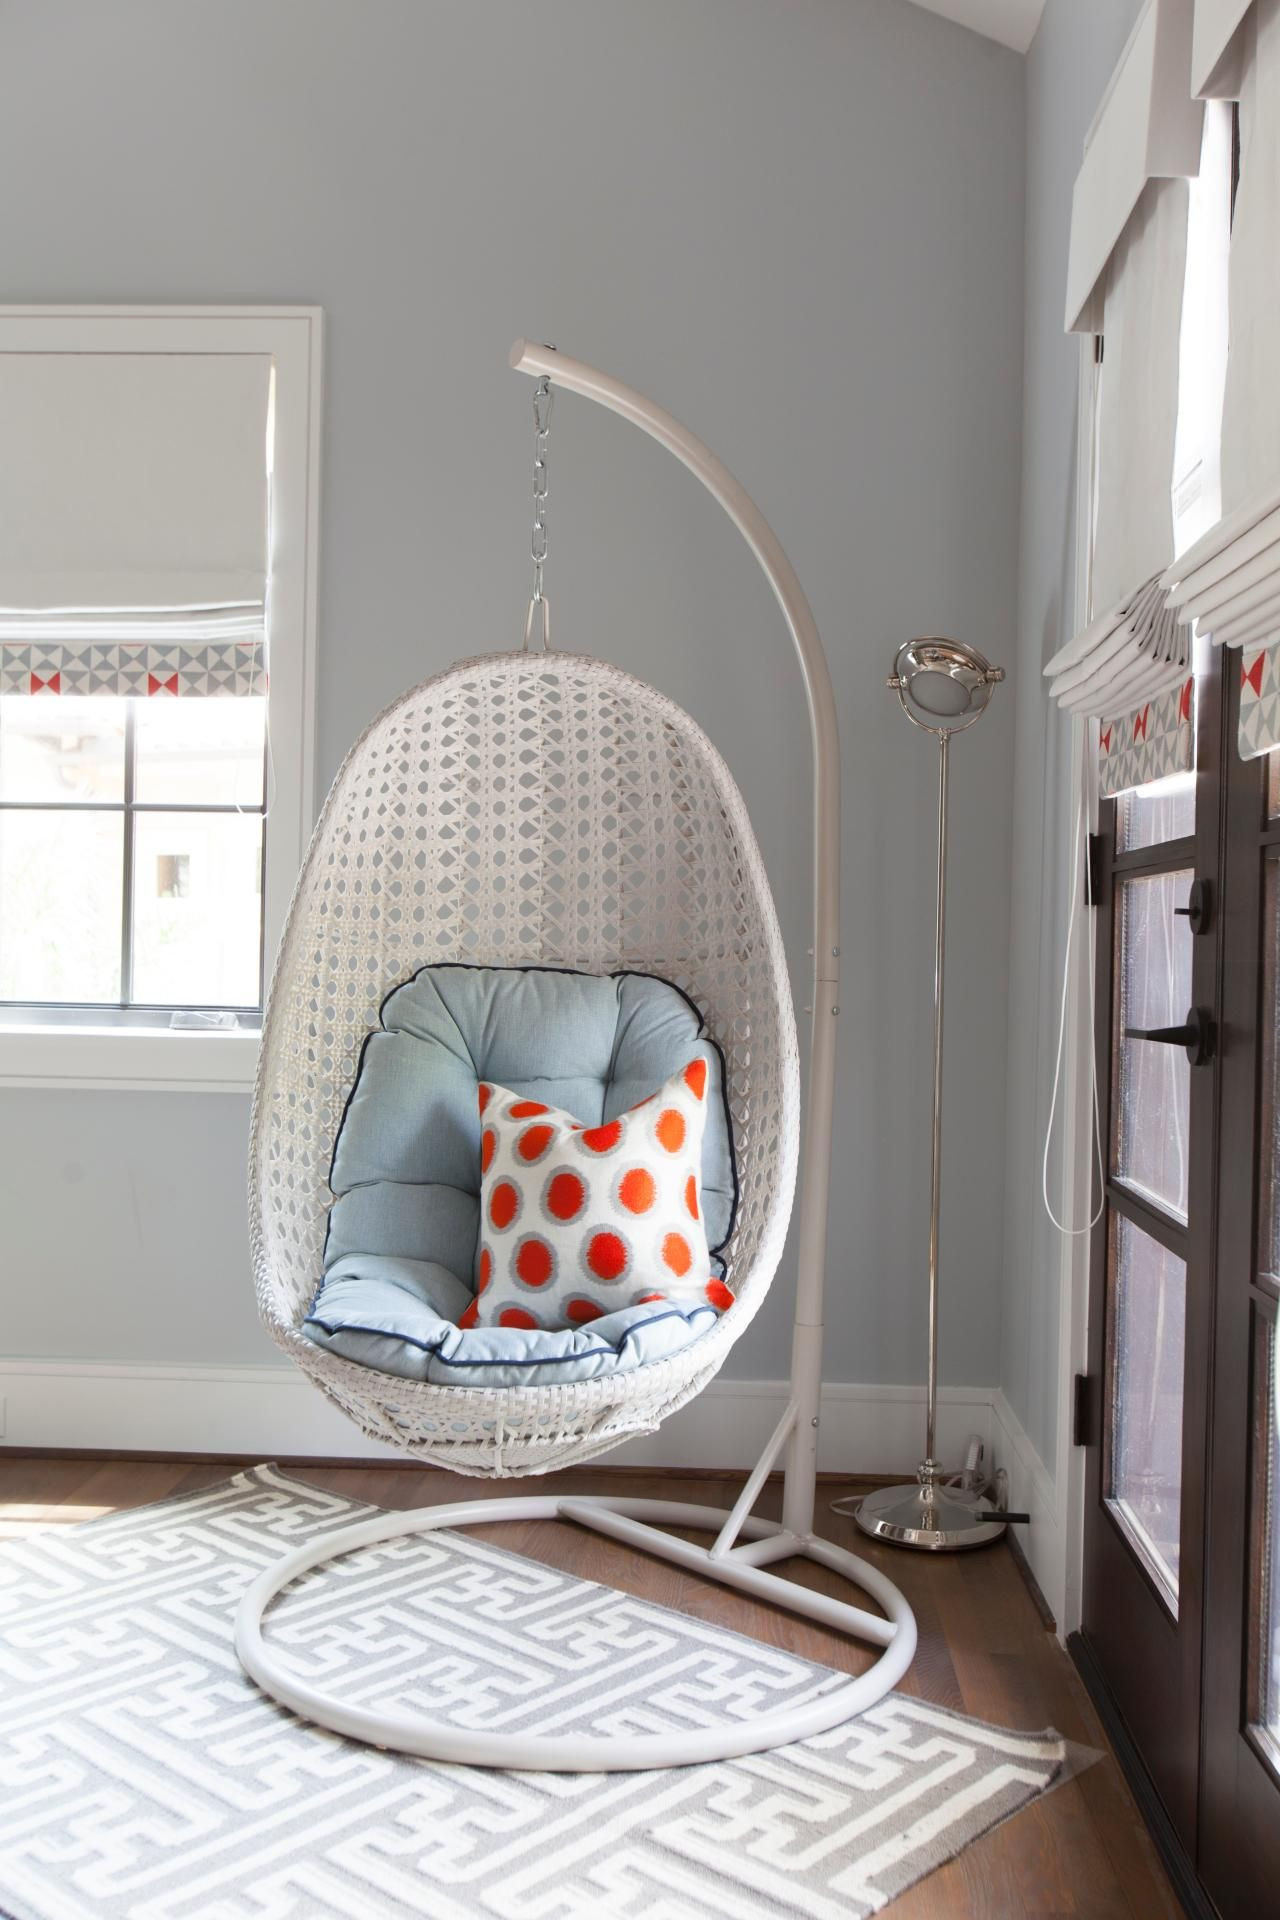 Swing For Kids Room
 Why Didn t My Childhood Bedroom Have a Hanging Chair